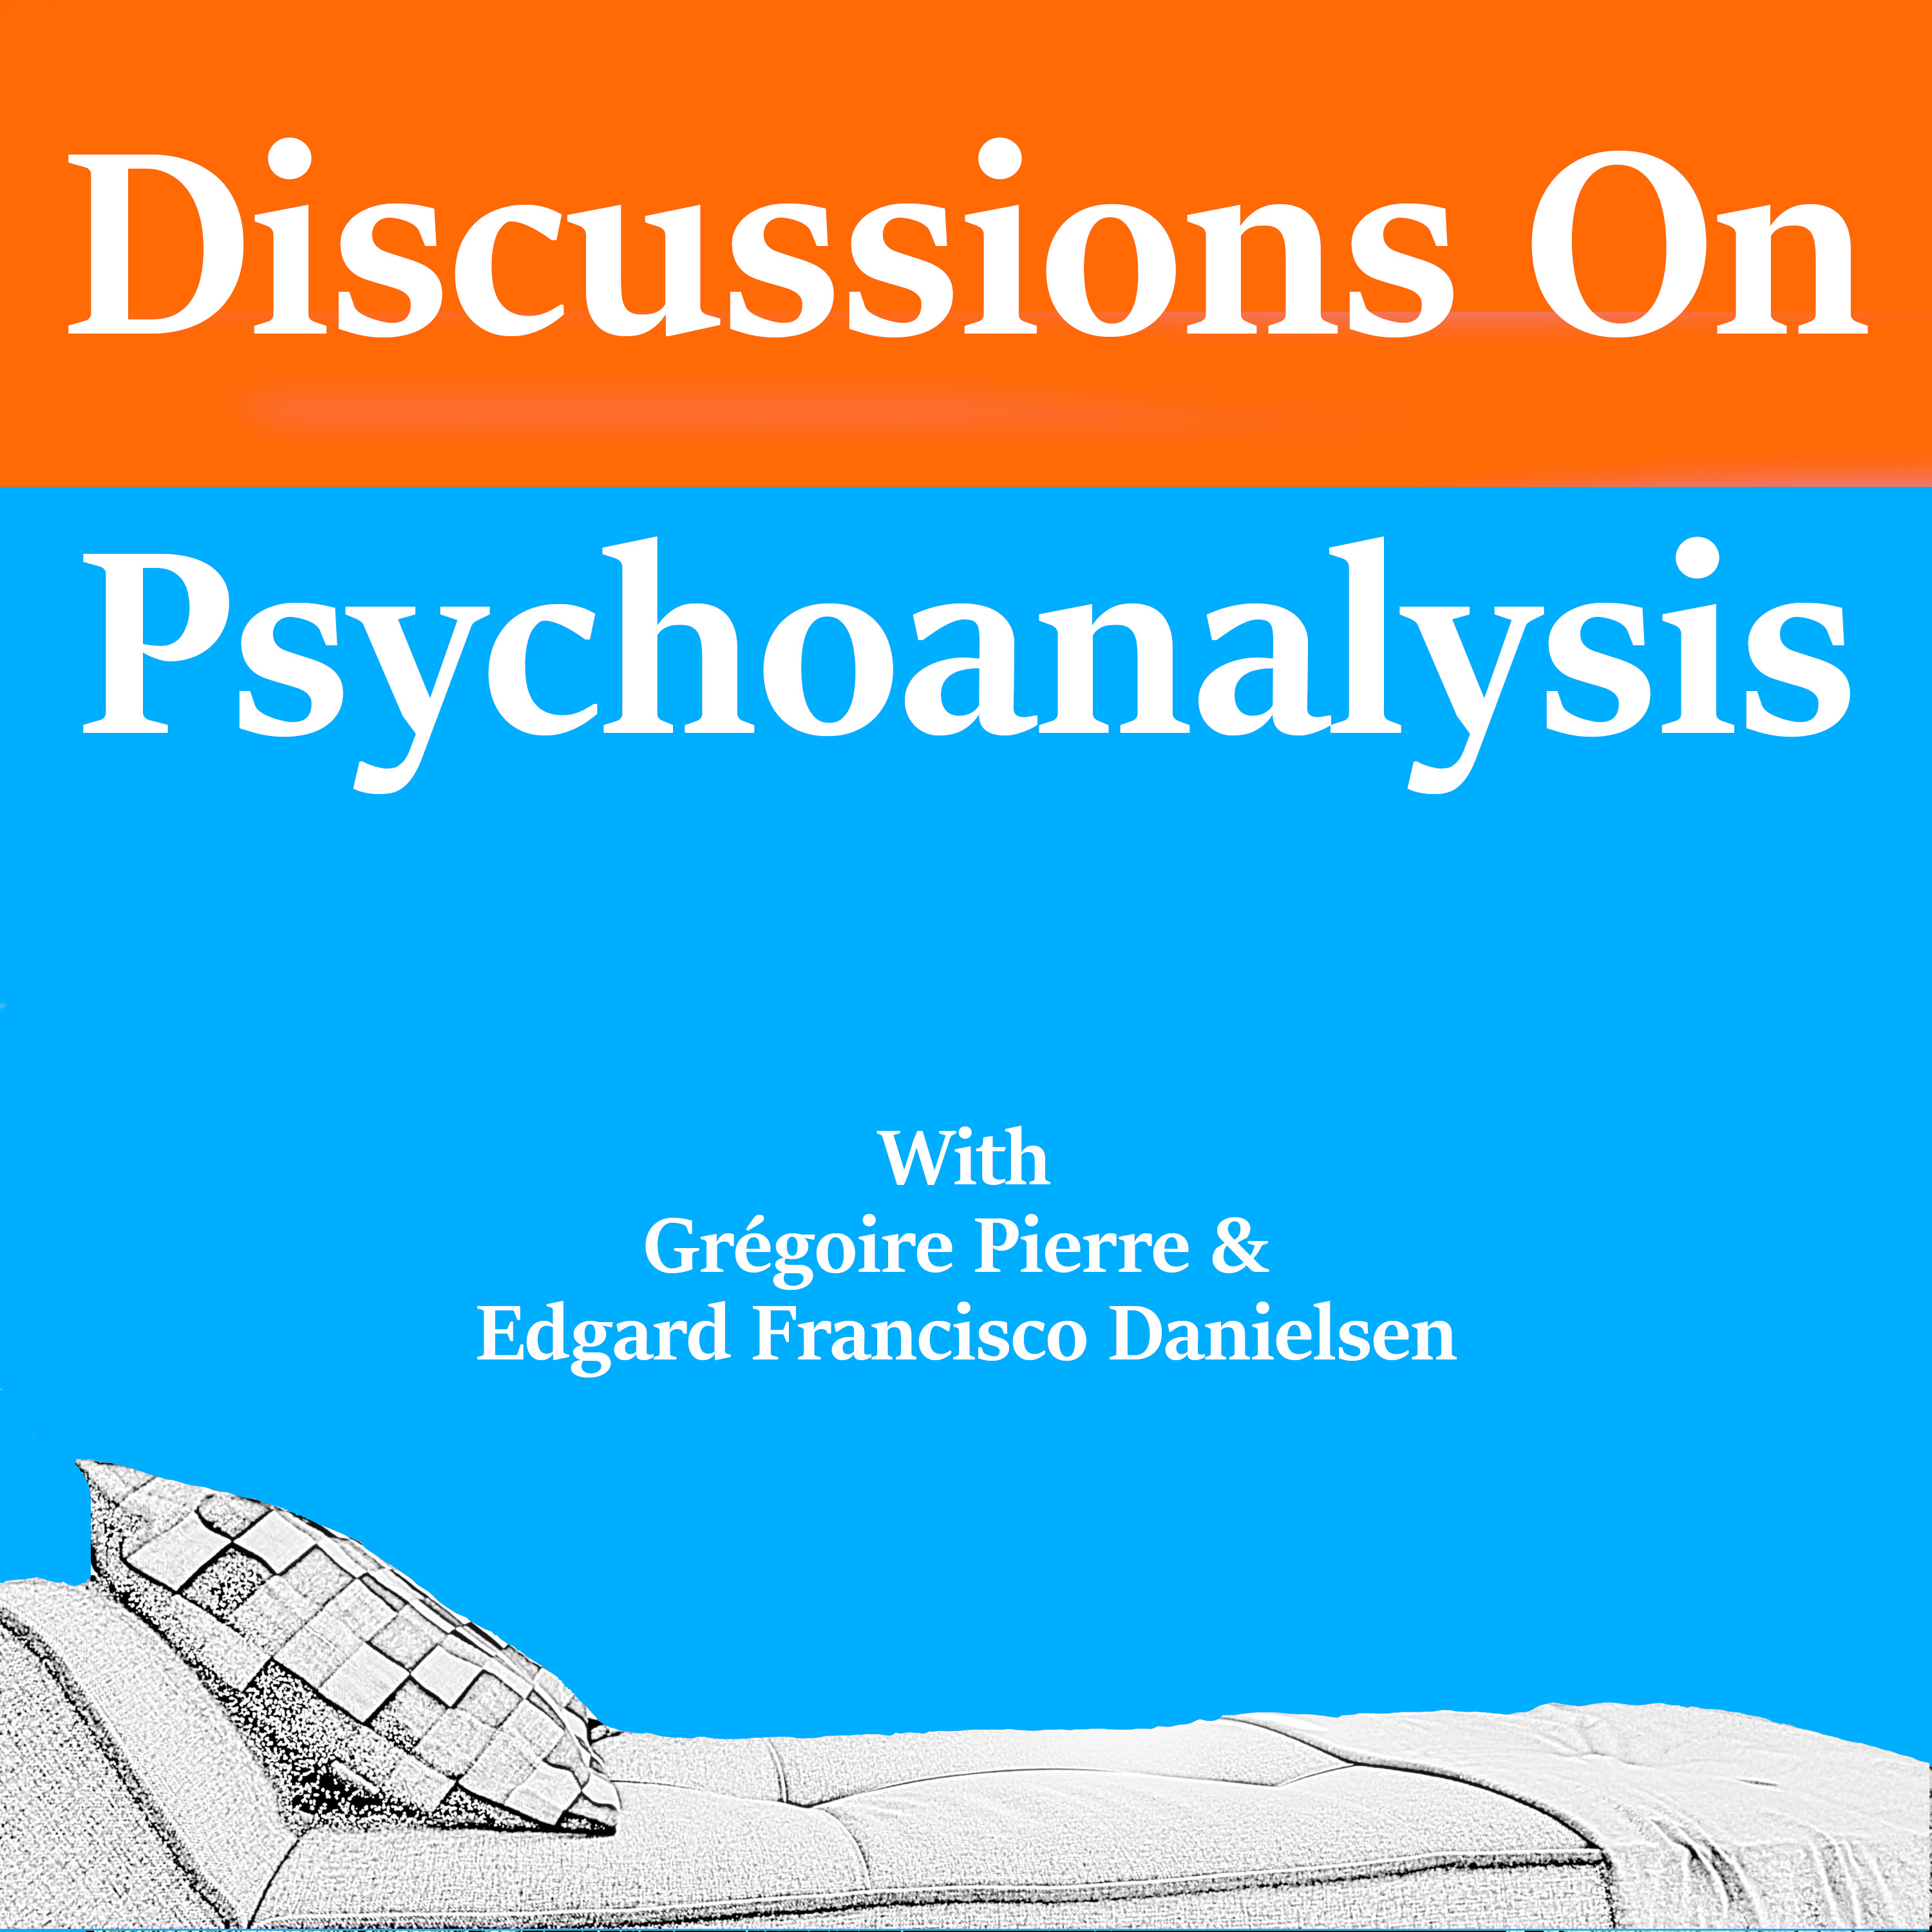 #46 On How to keep Psychoanalysis alive